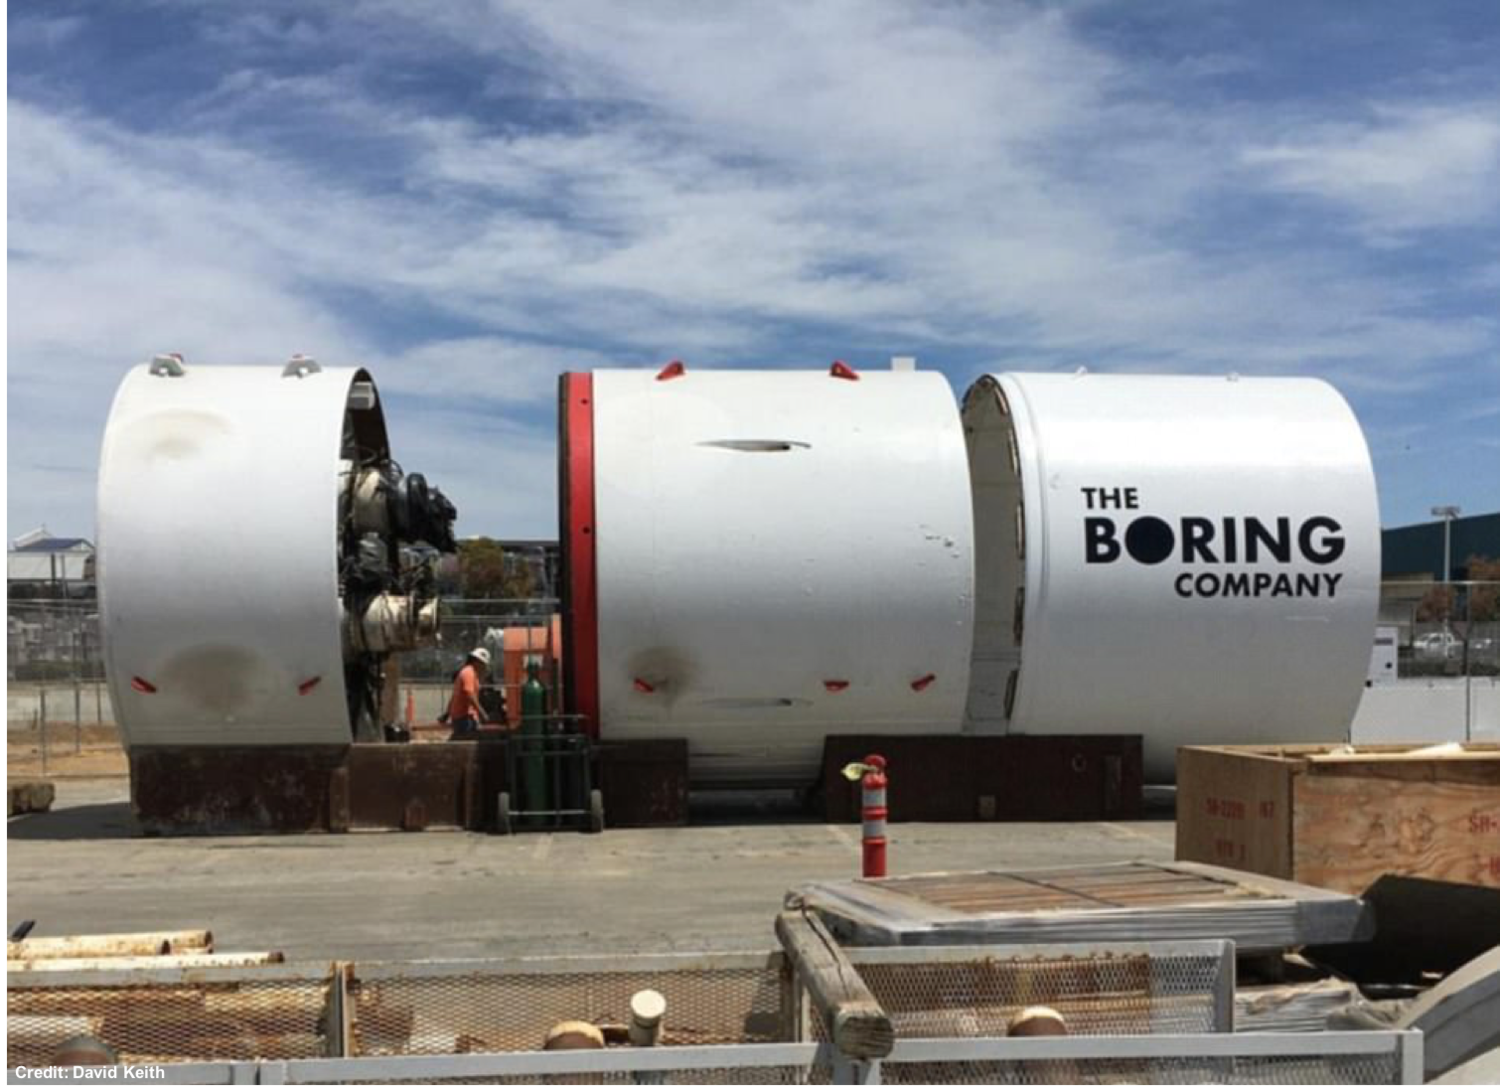 One of The Boring Co.'s TBMs. Source: The Boring Co.